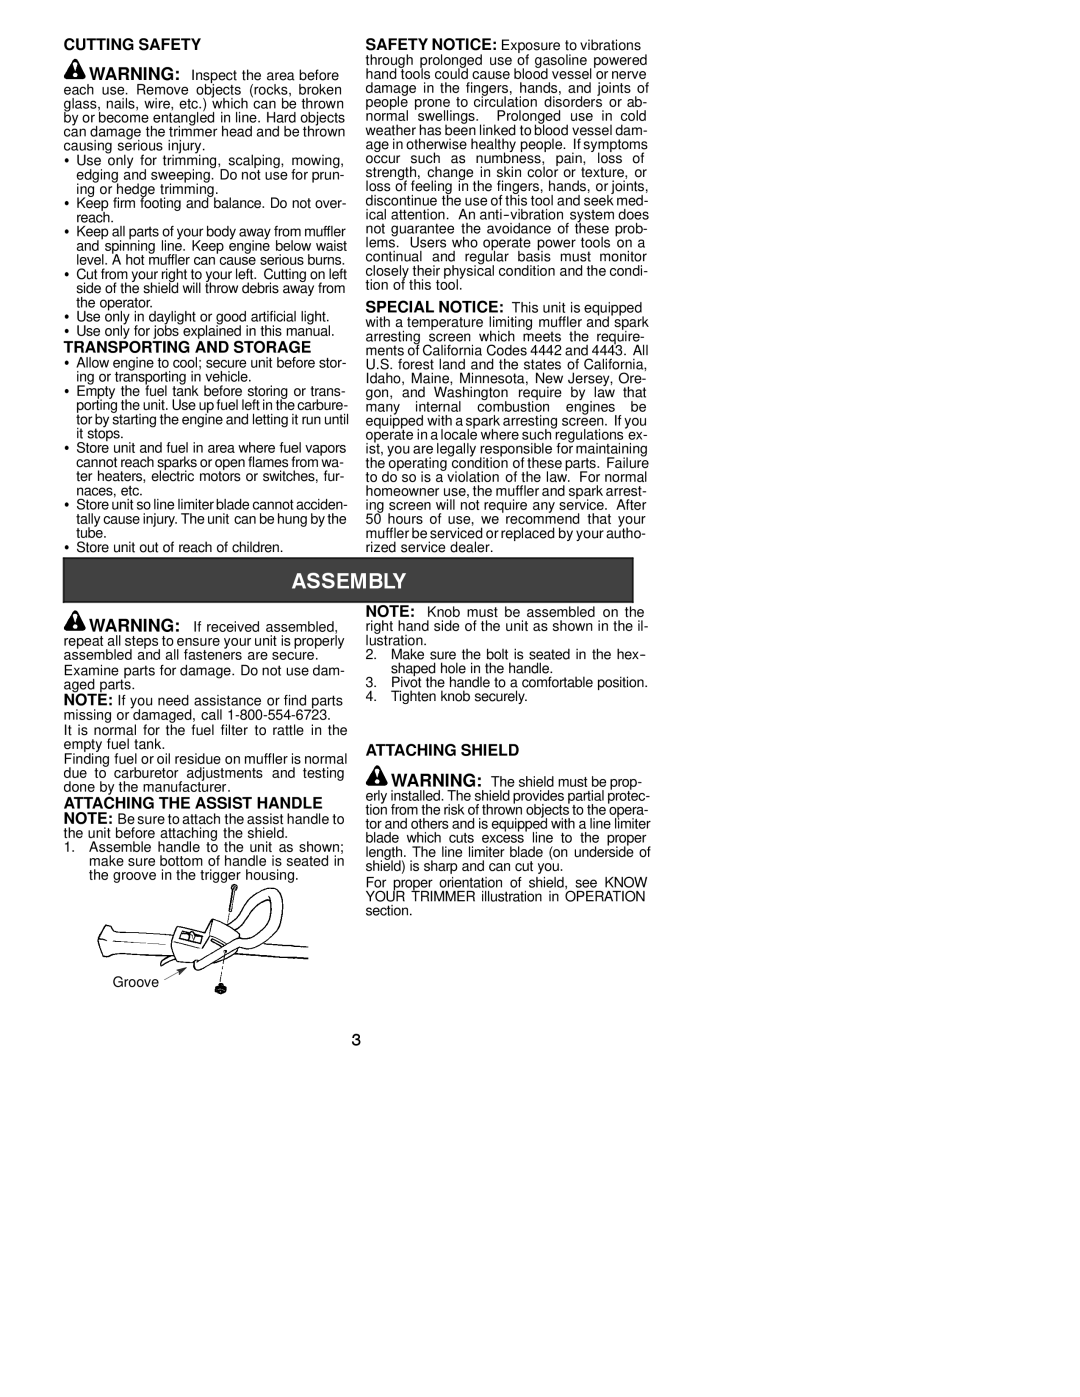 Weed Eater 530163711 instruction manual Cutting Safety, Transporting and Storage, Attaching Shield, Operator 